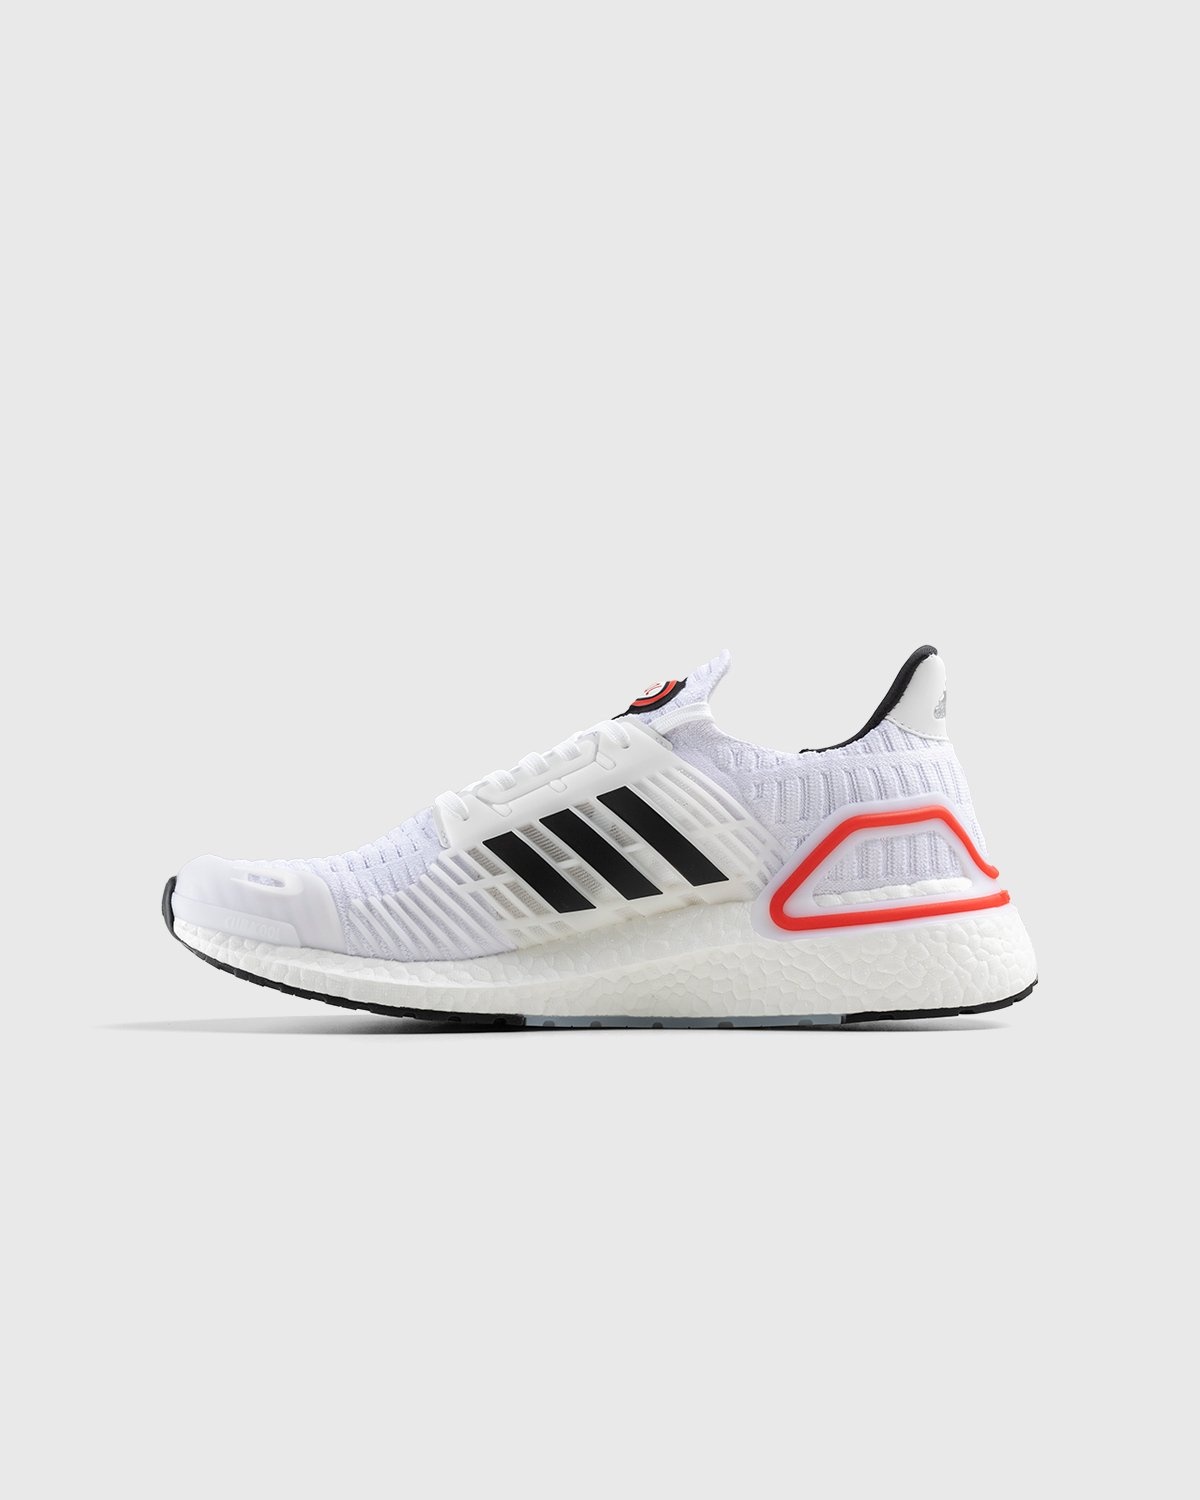 Adidas – Ultraboost Climacool 1 DNA White/Black/Red - Low Top Sneakers - White - Image 2